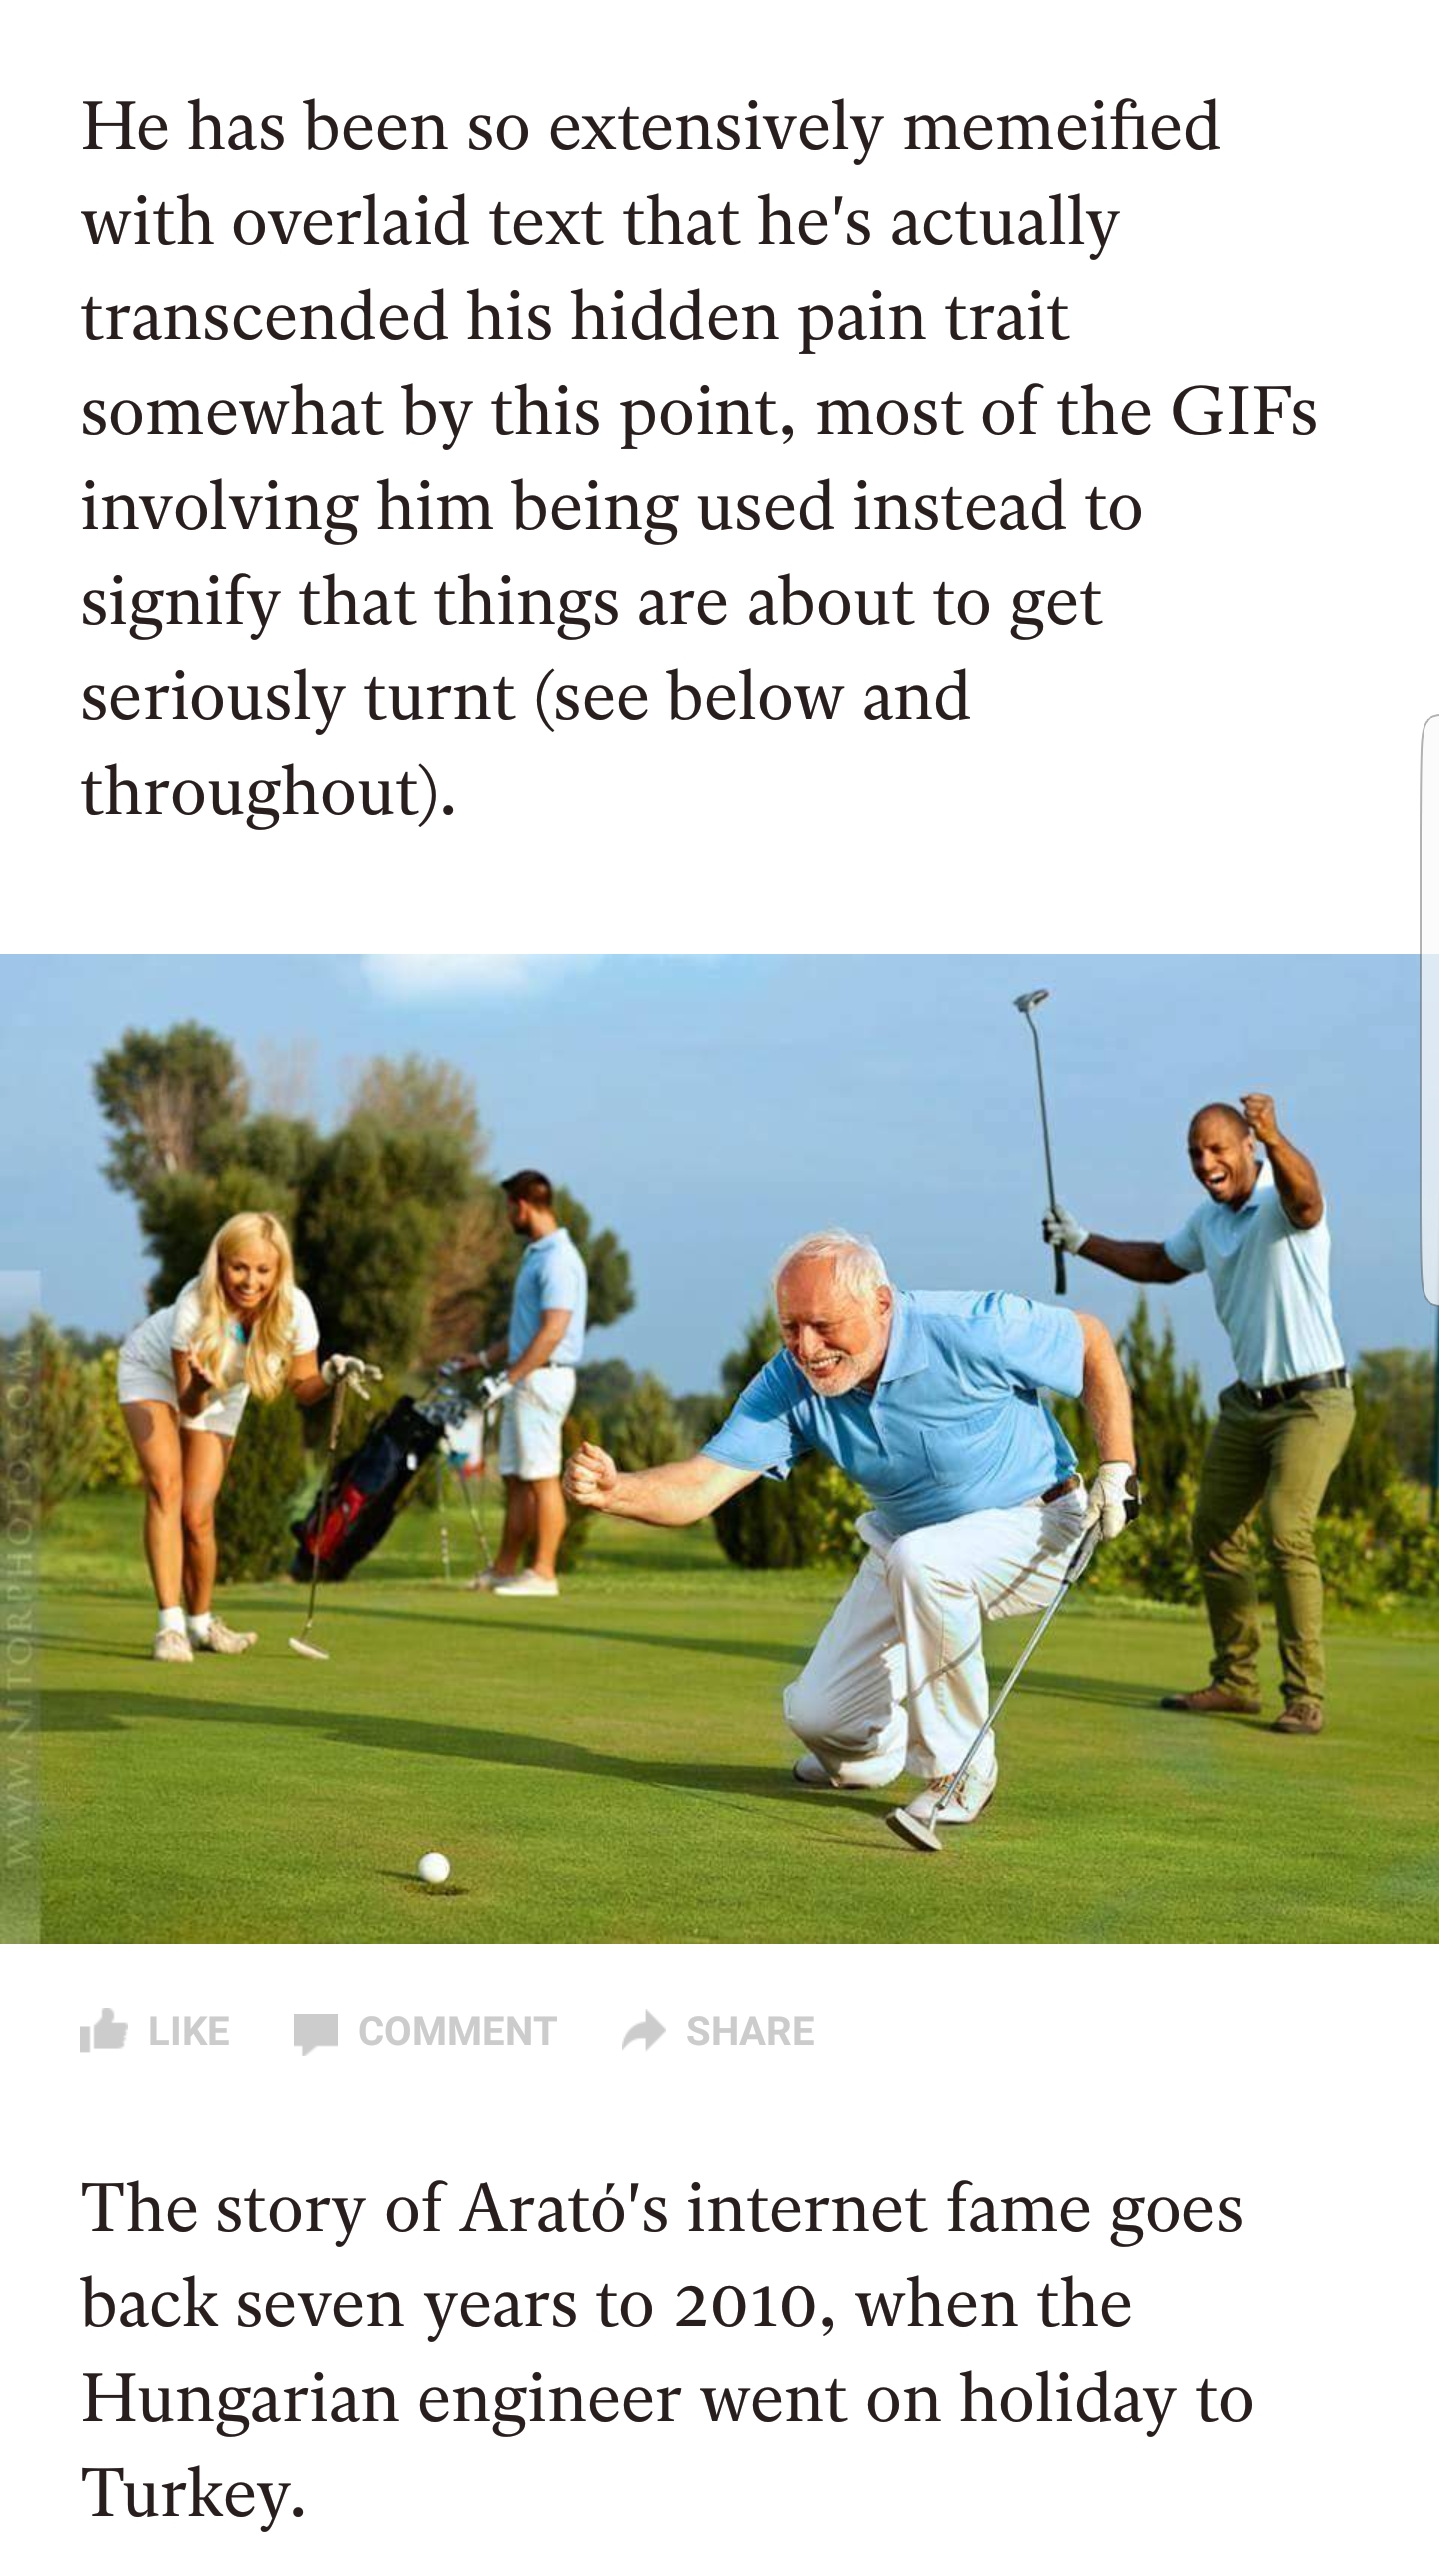 old person golfing - He has been so extensively memeified with overlaid text that he's actually transcended his hidden pain trait somewhat by this point, most of the GIFs involving him being used instead to signify that things are about to get seriously t